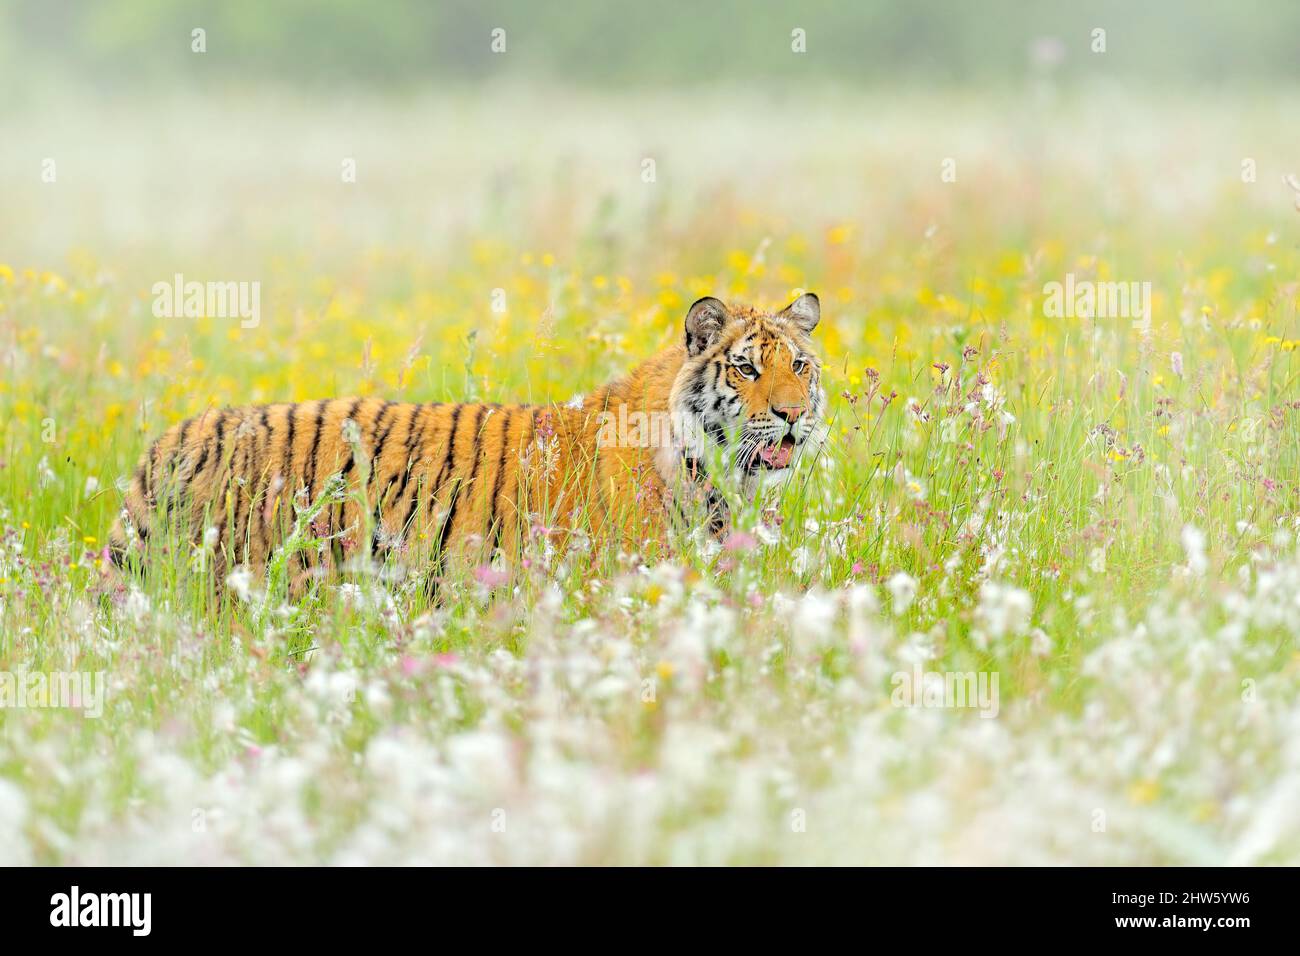 https://c8.alamy.com/comp/2HW5YW6/amur-tiger-hunting-in-green-white-cotton-grass-dangerous-animal-taiga-russia-big-cat-sitting-in-environment-wild-cat-in-wildlife-nature-siberia-2HW5YW6.jpg